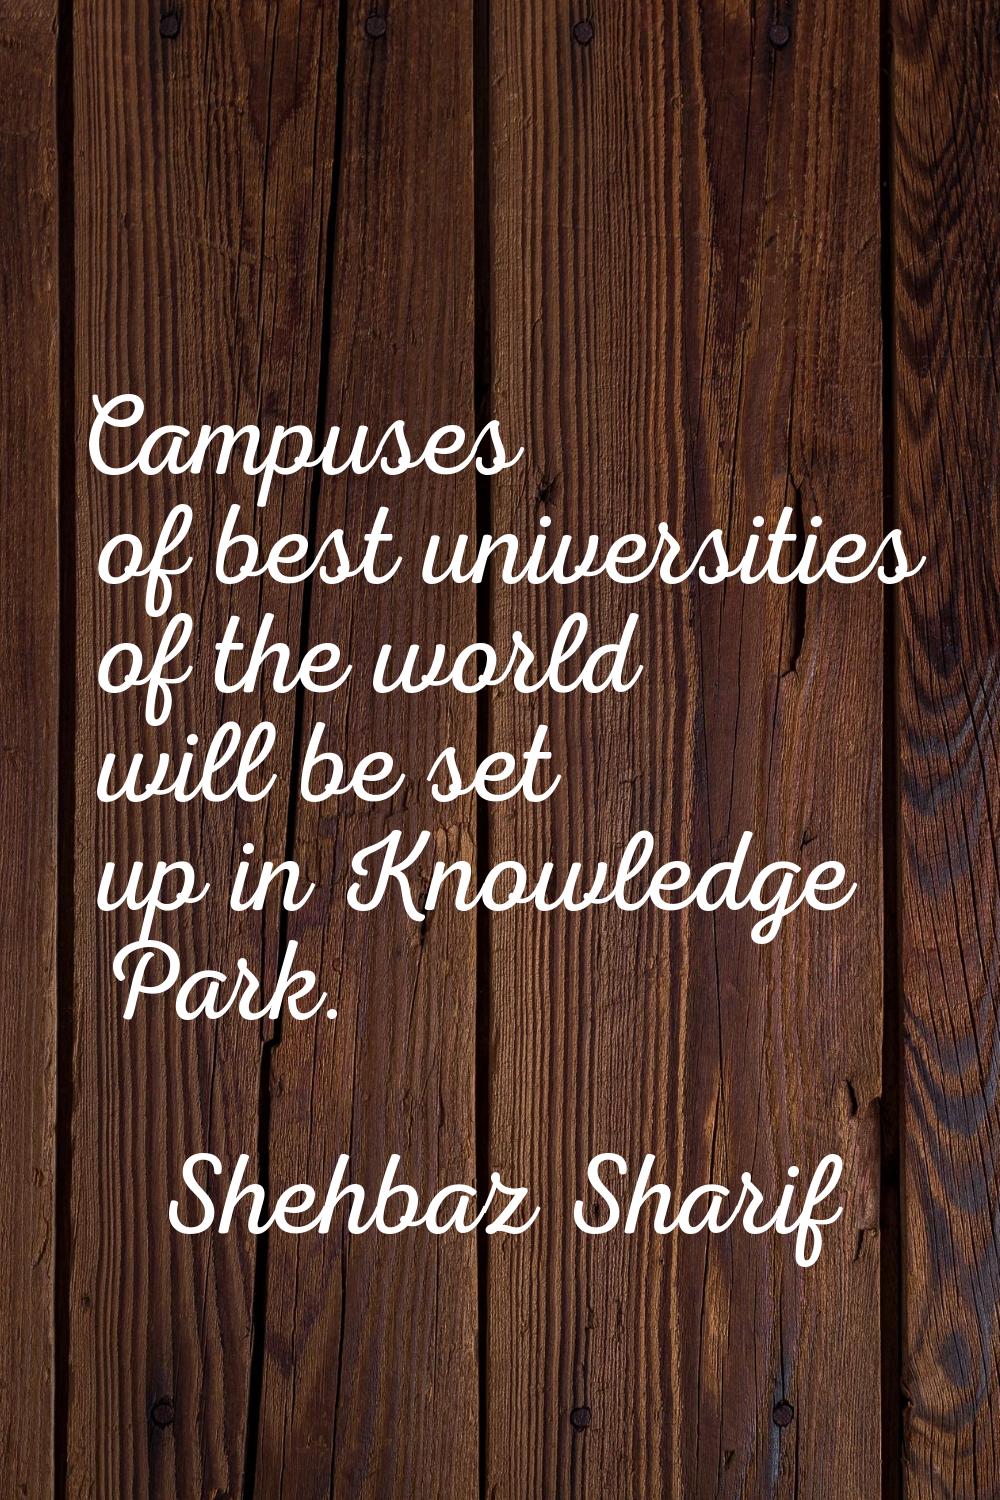 Campuses of best universities of the world will be set up in Knowledge Park.